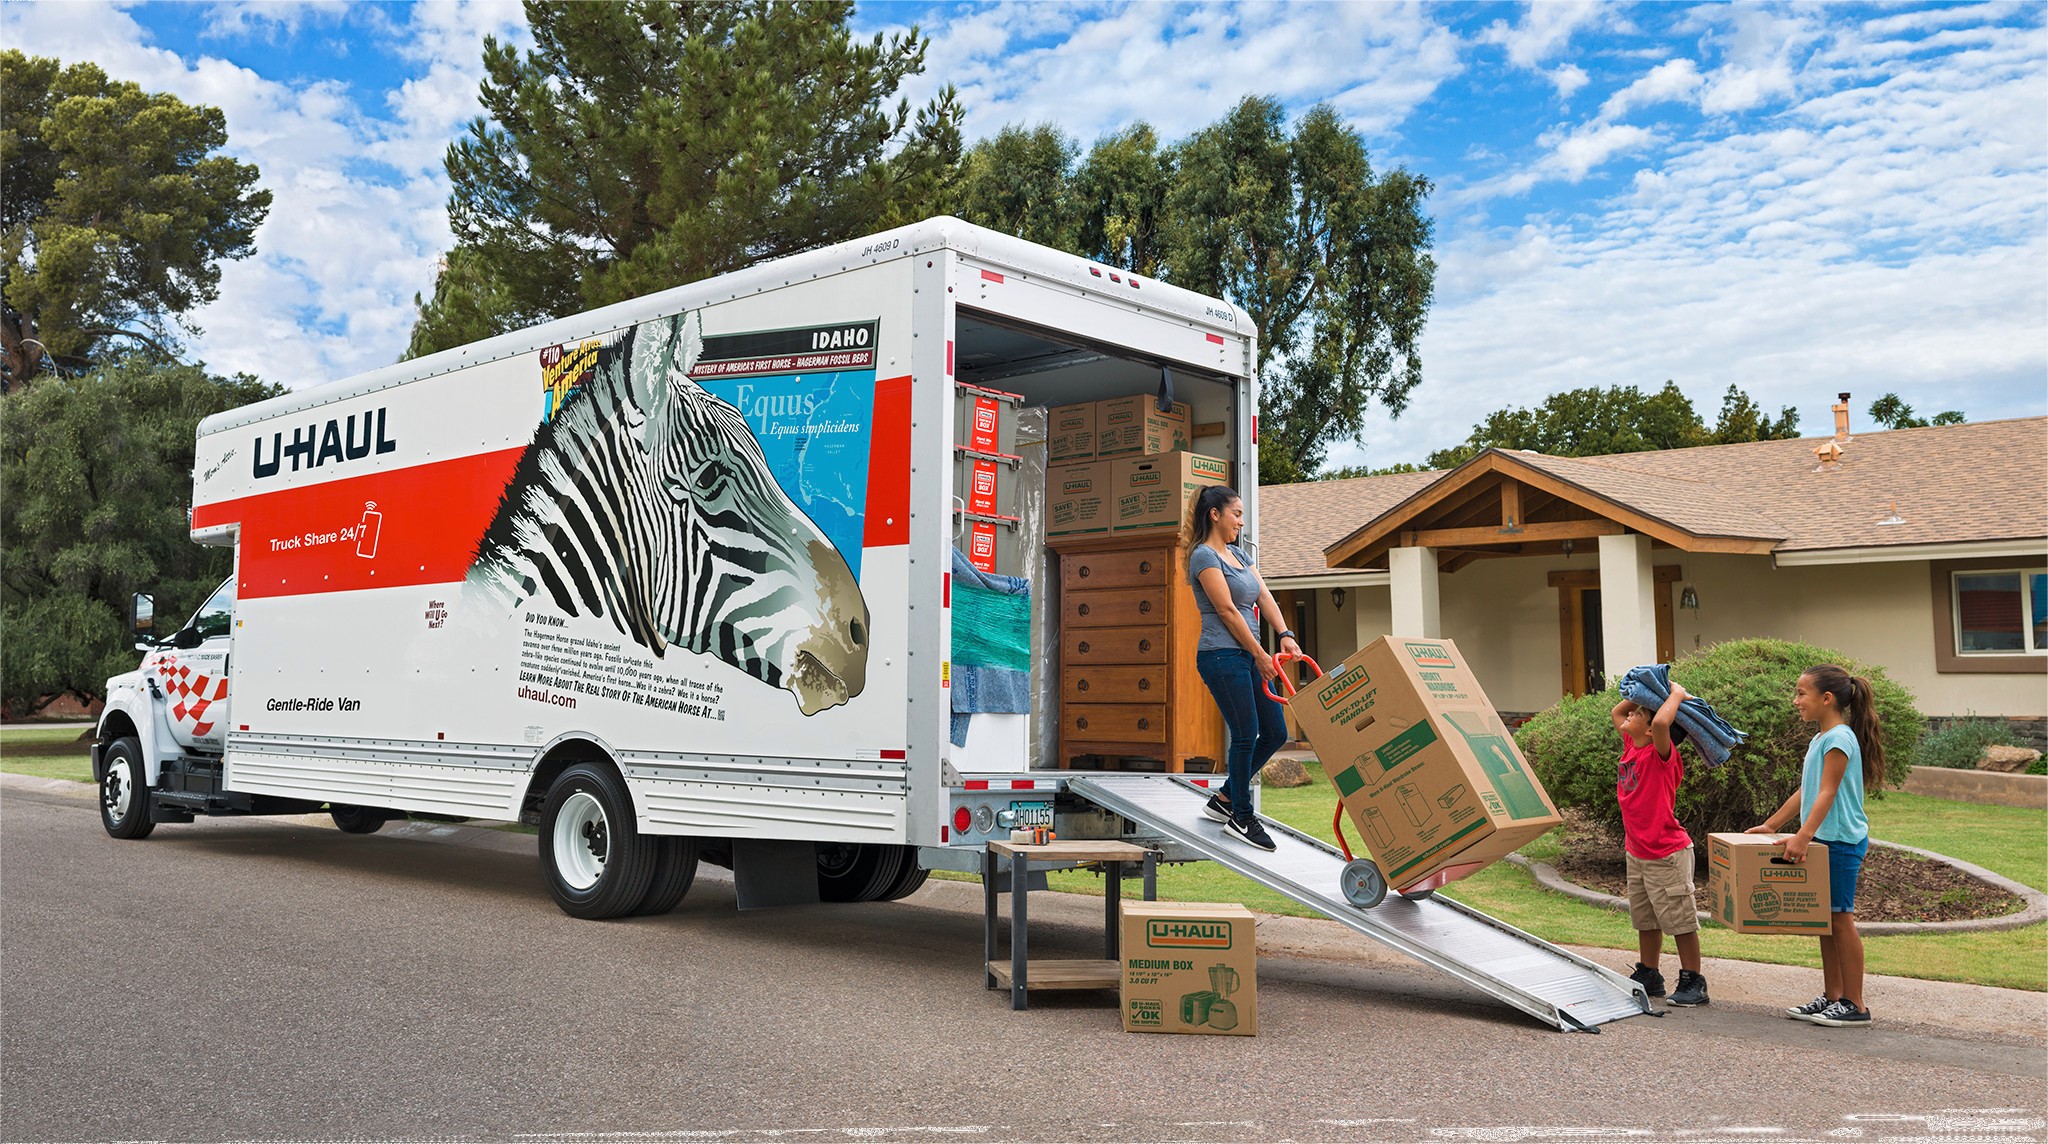 Uhaul Same Day Delivery: Get Your Packages Faster and Easier